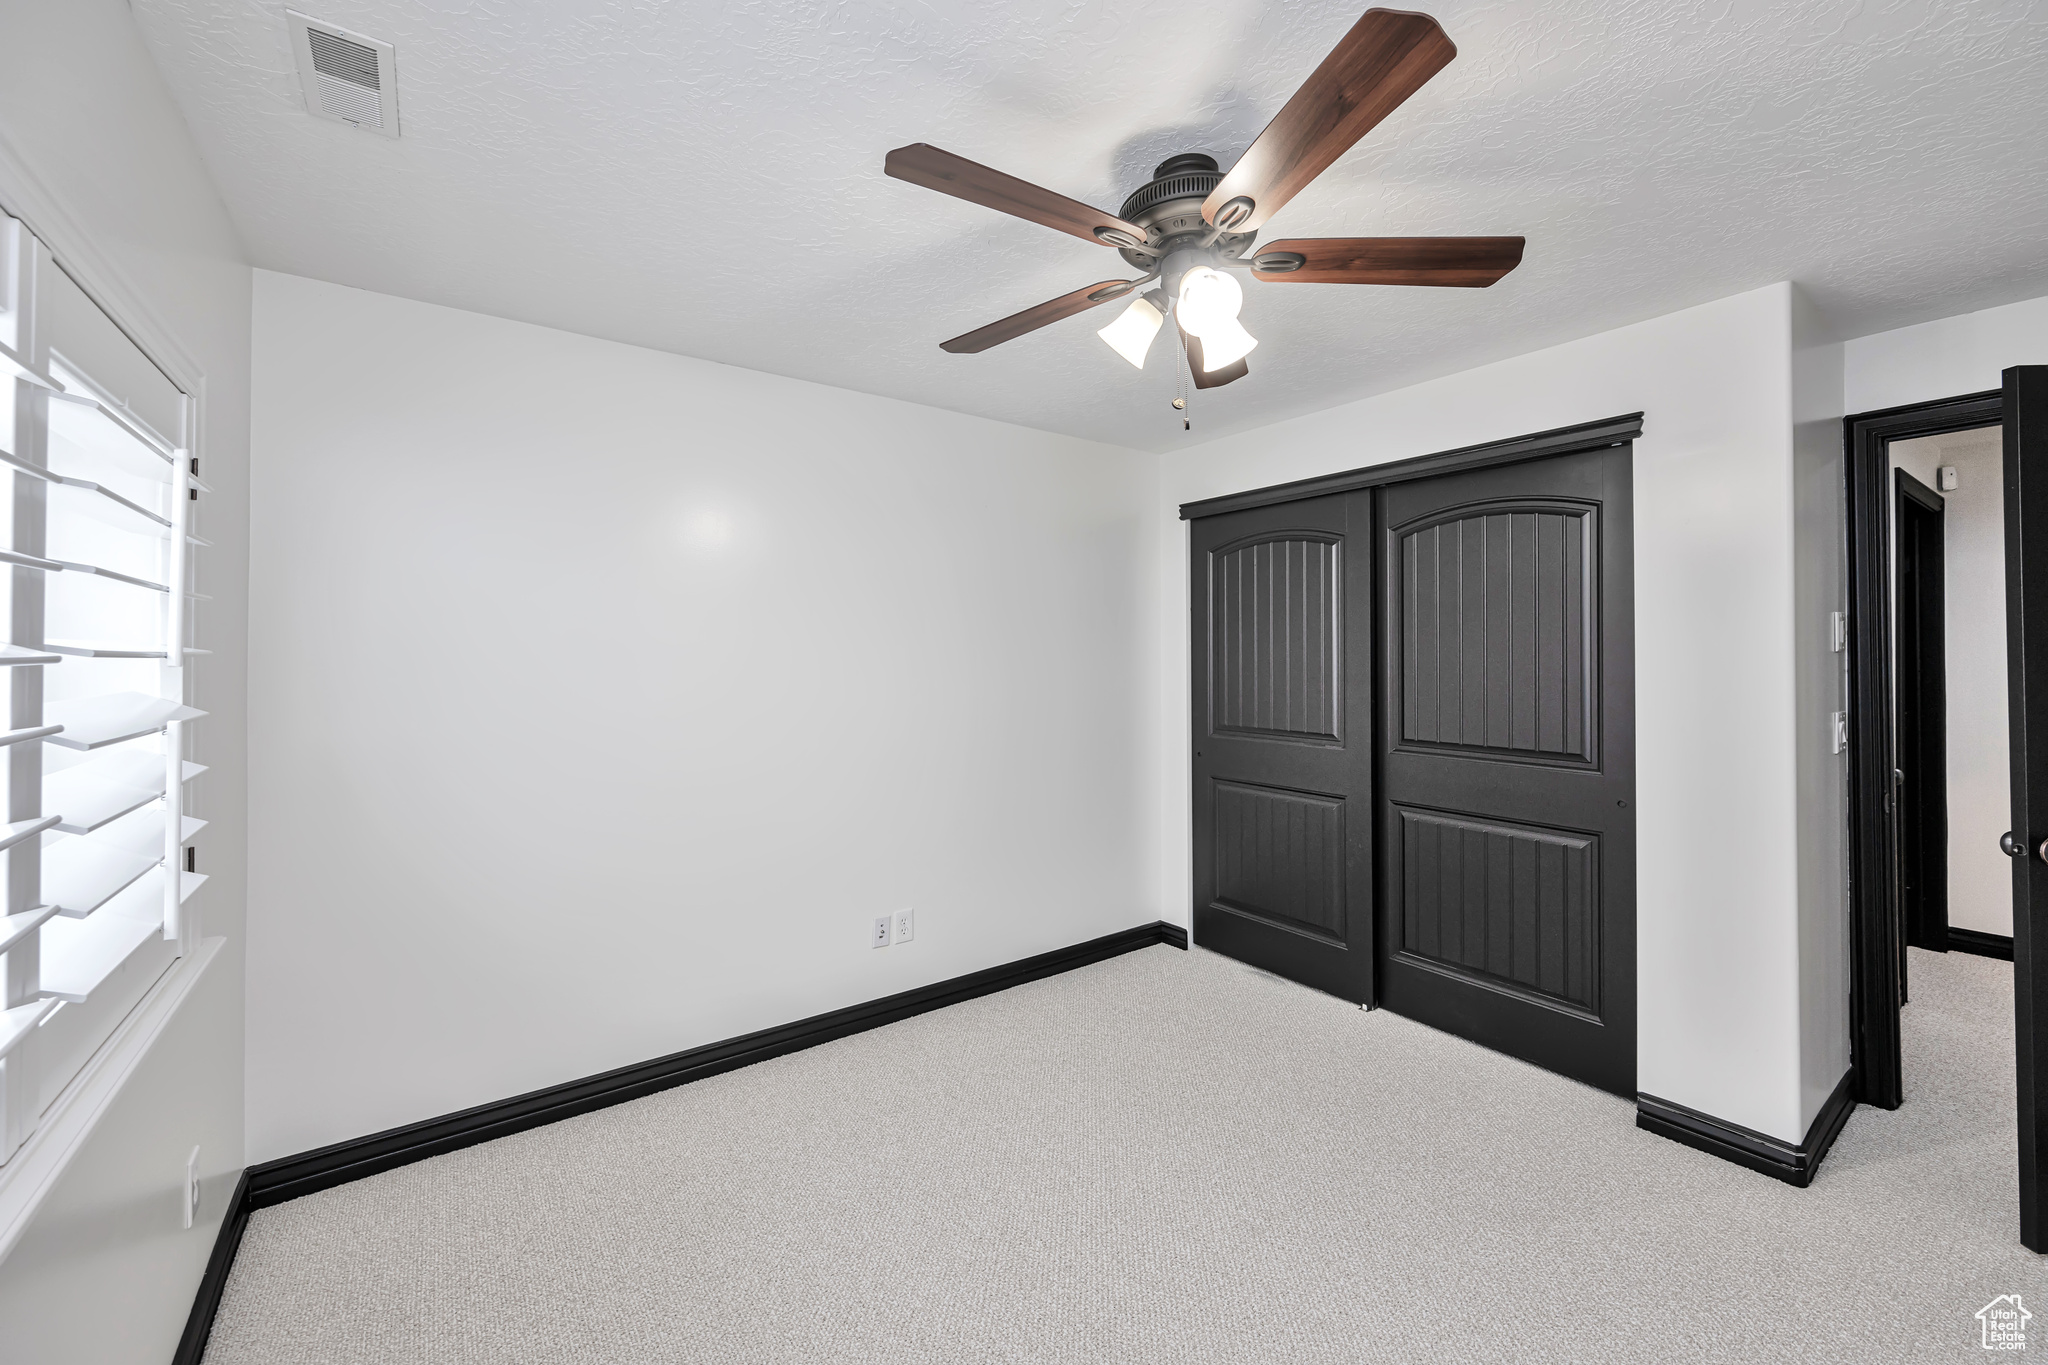 Bedroom 6 featuring carpet, a closet, and ceiling fan